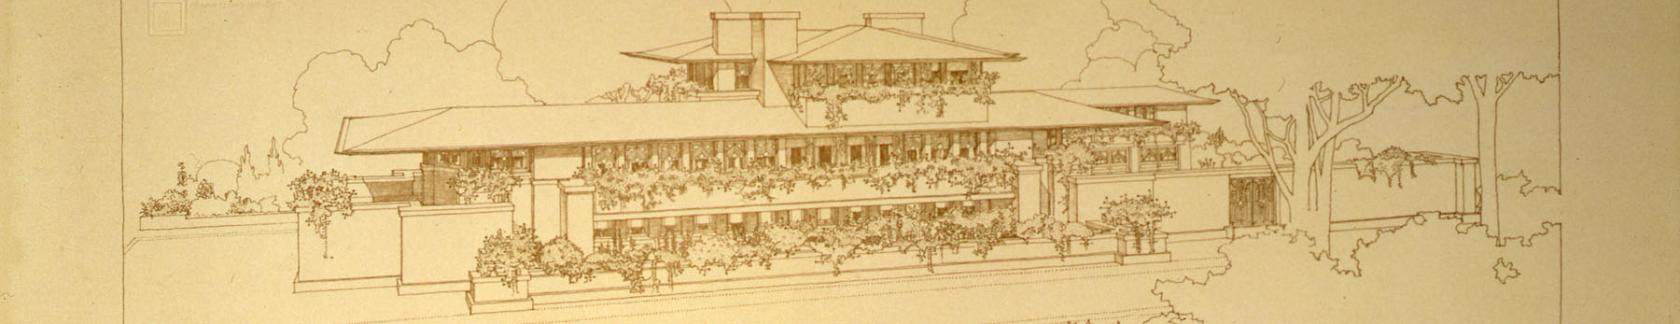 sketch drawing from Frank Lloyd Wright Trust archives